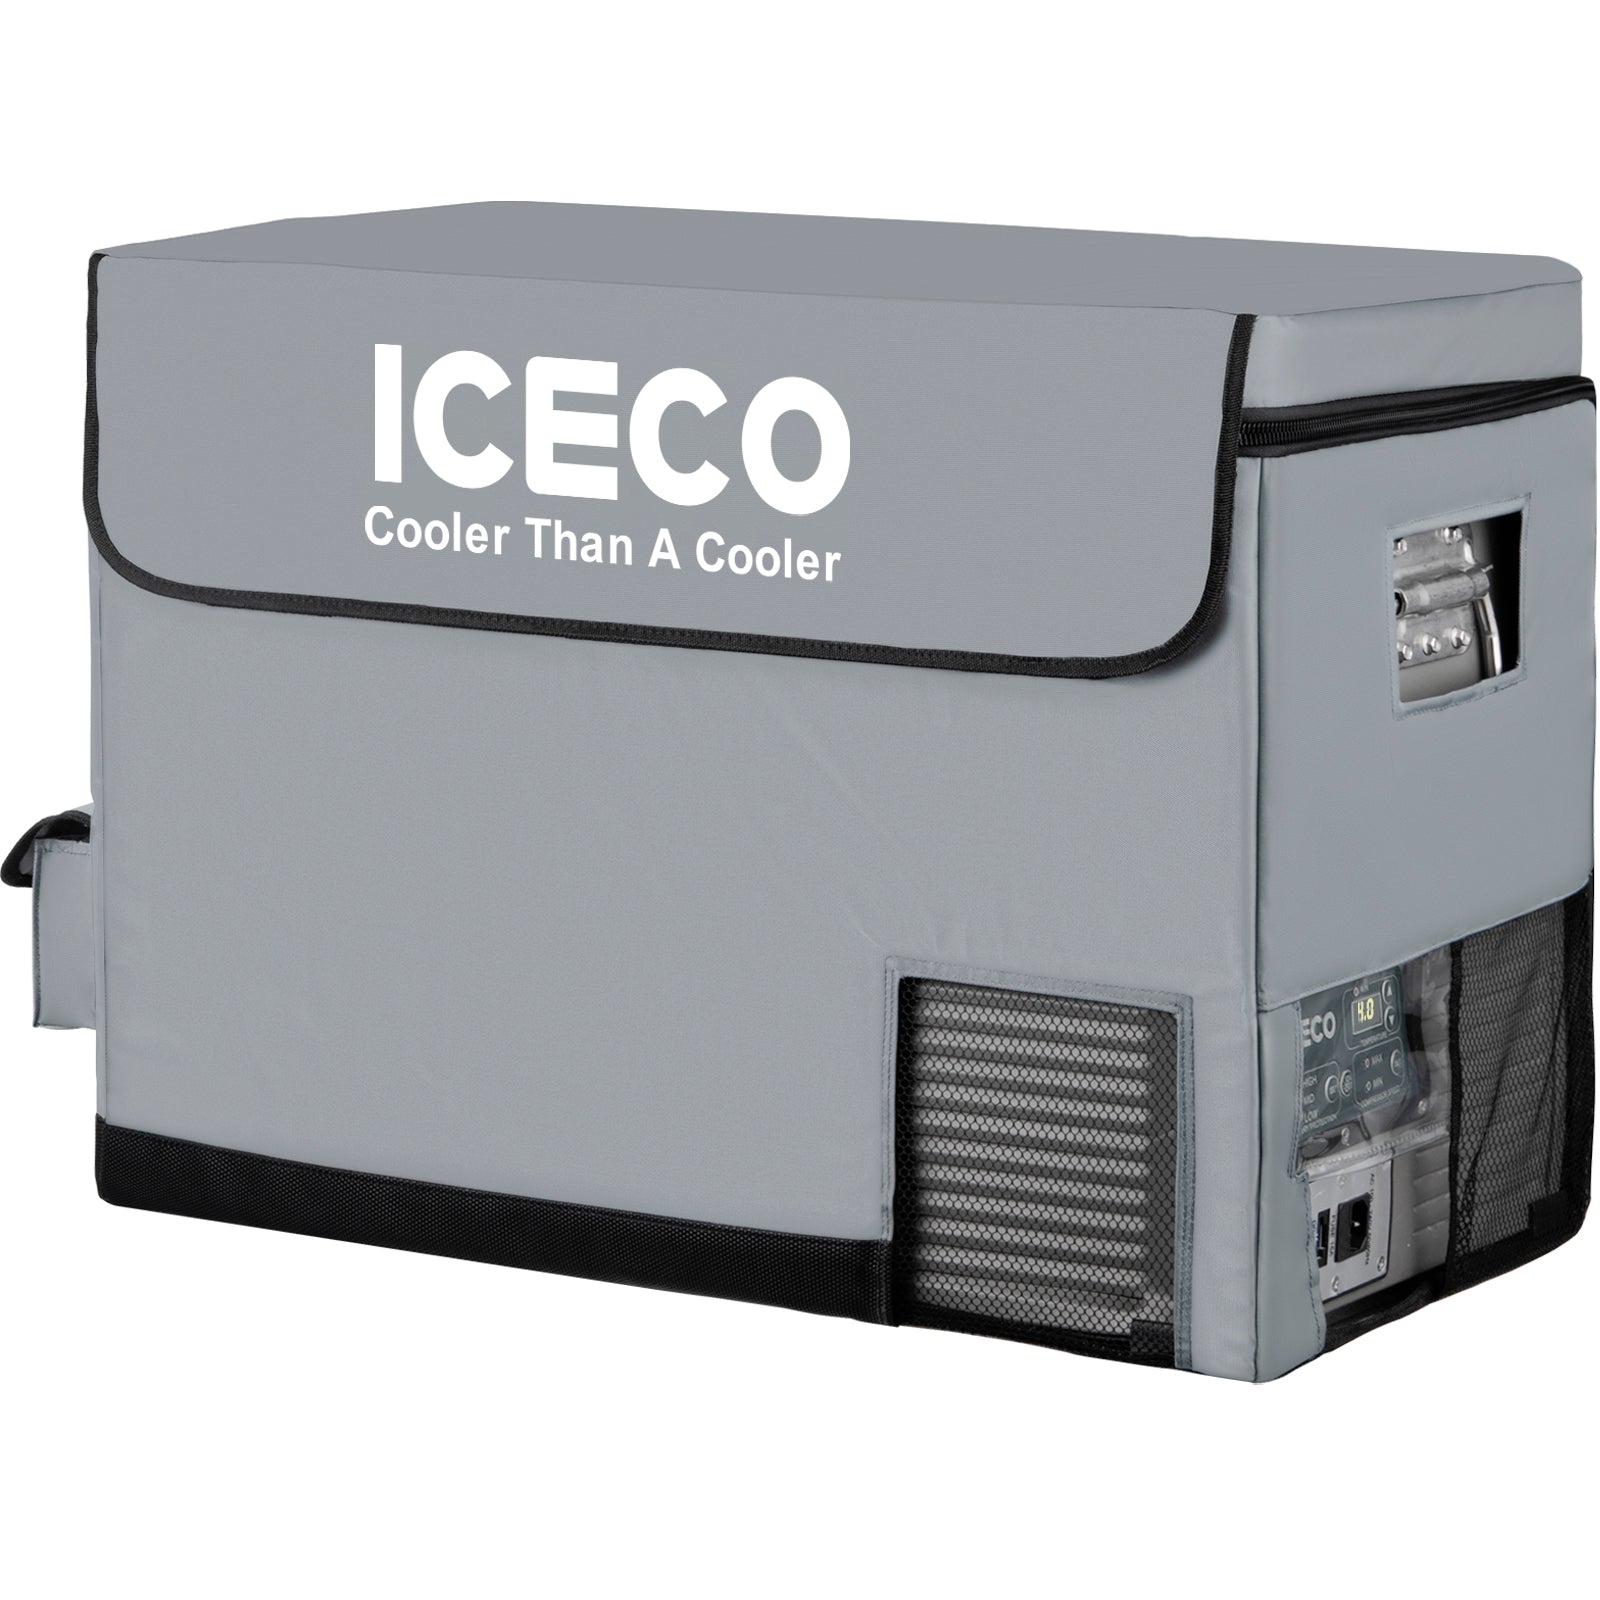 ICECO VL45 Insulated Cover